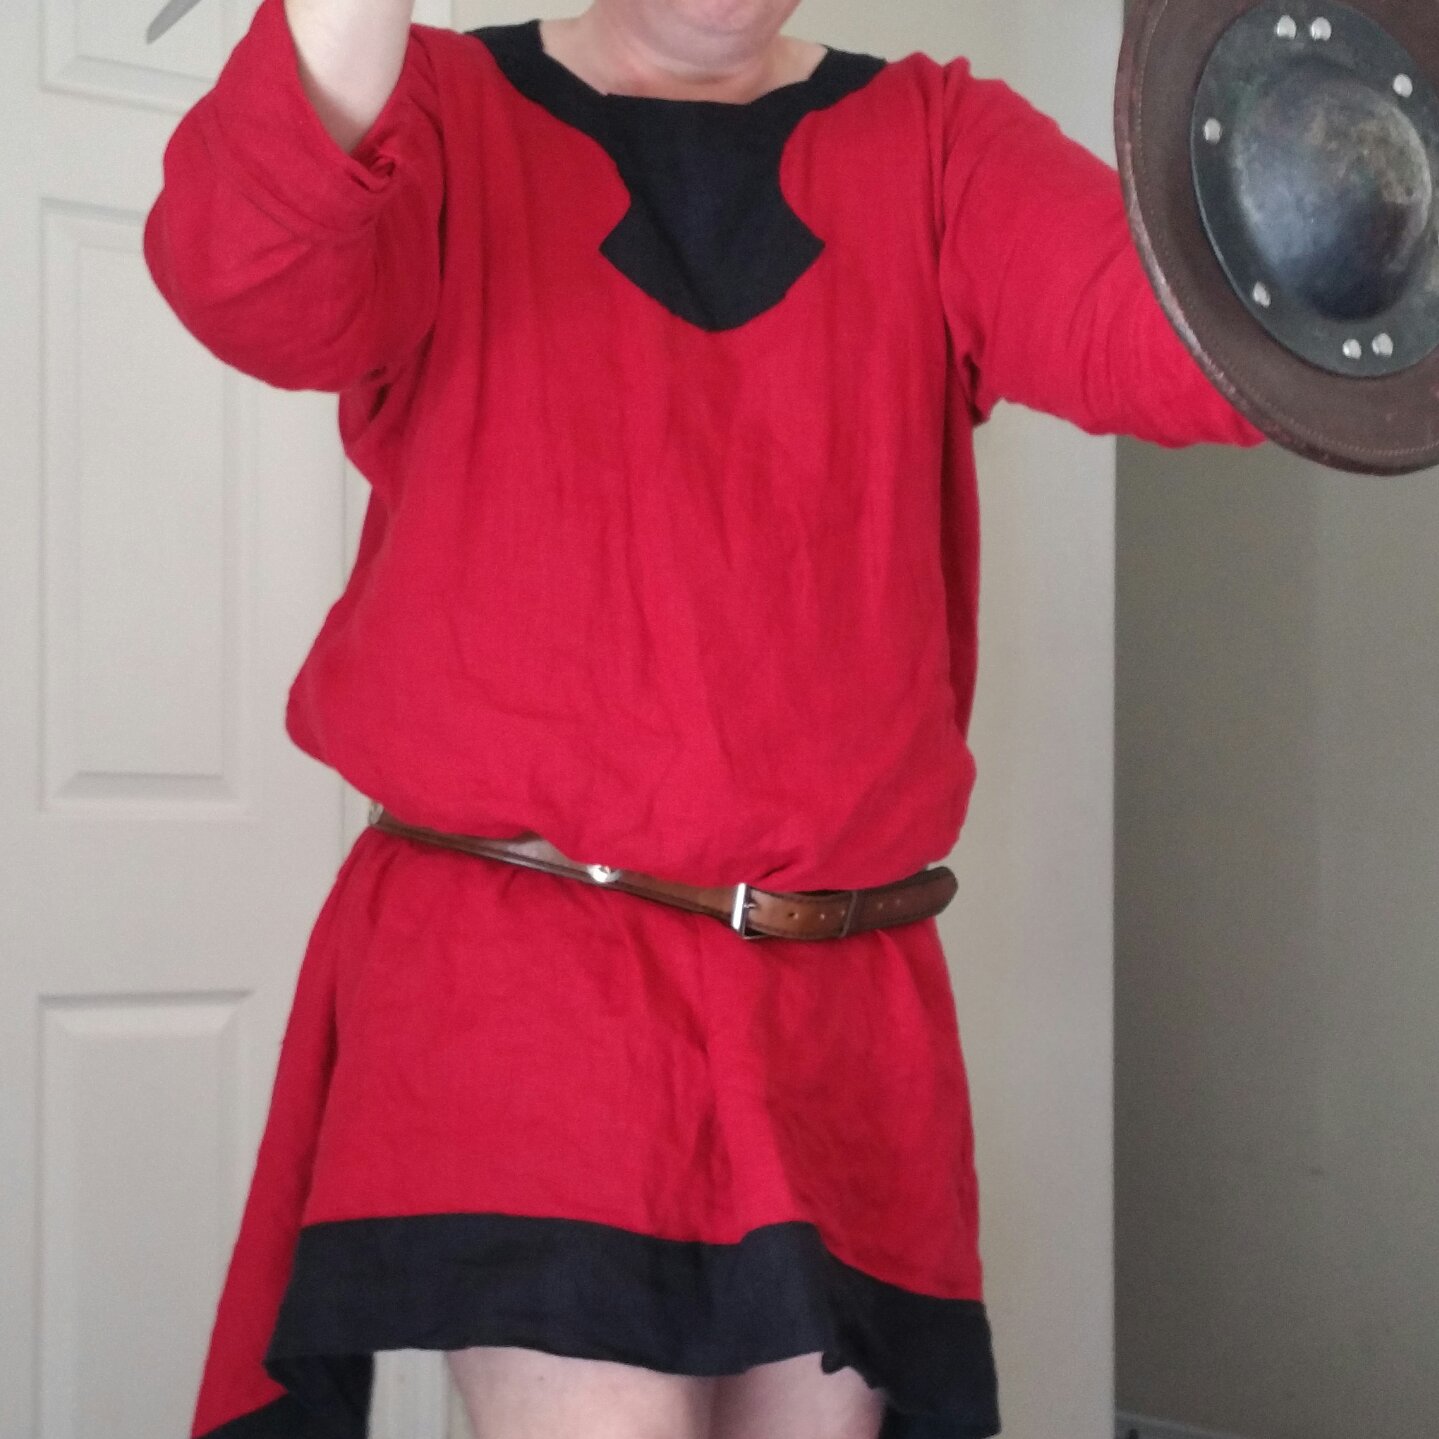 C, Medieval tunic in crimson and black.  This was my first garment.   One of the sleeves is folded back...